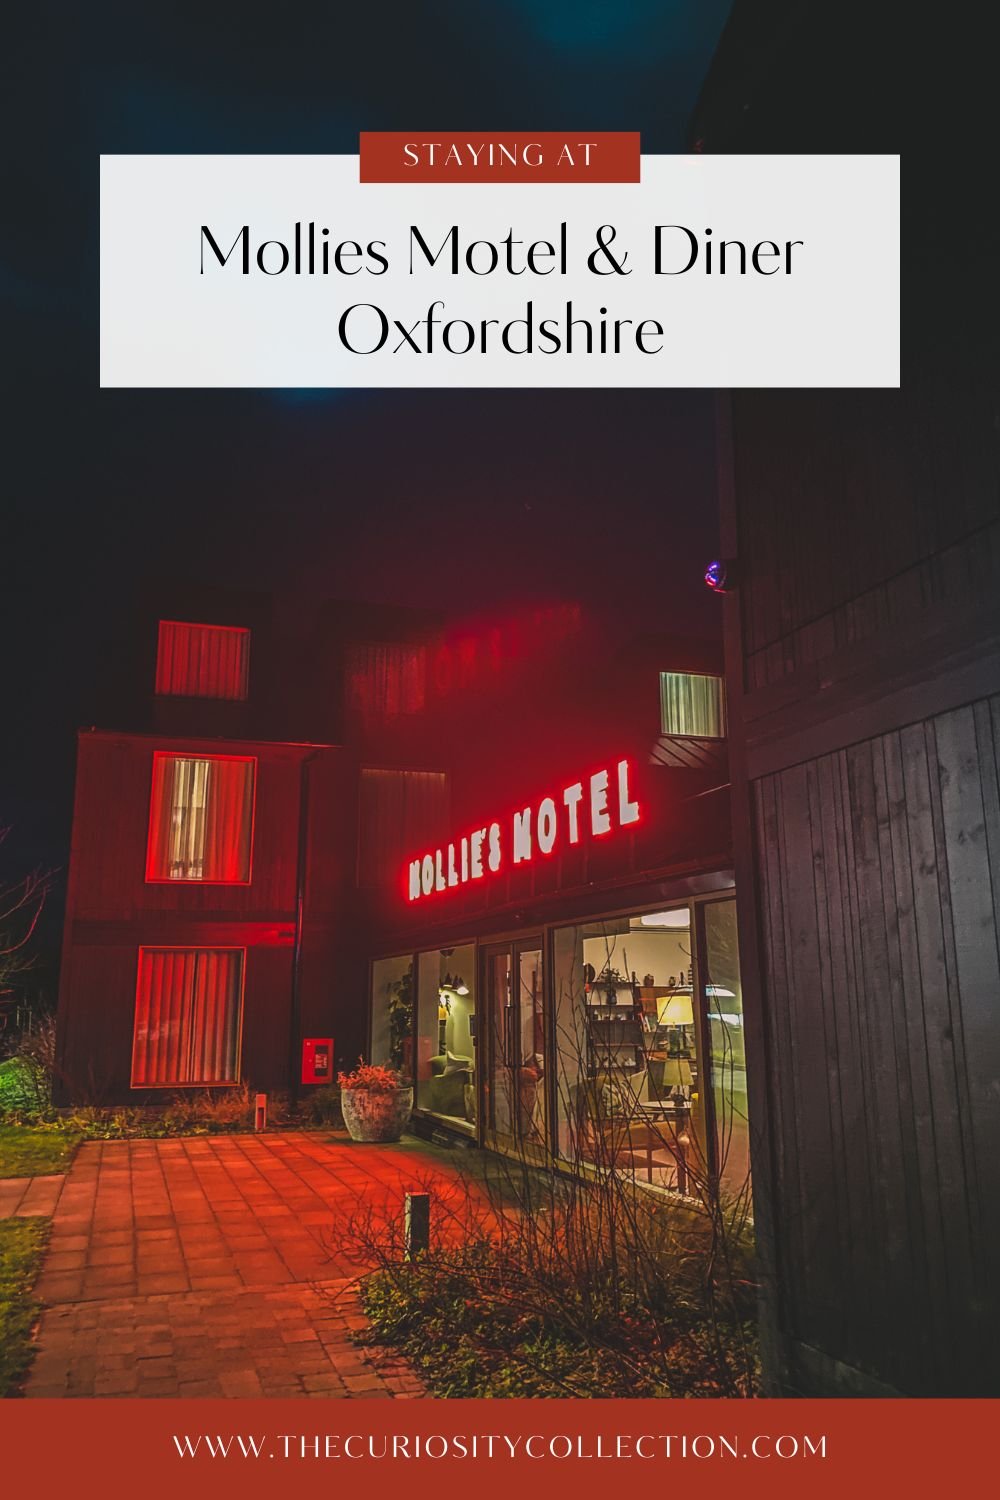 Staying at Mollies Motel and Diner, Oxfordshire